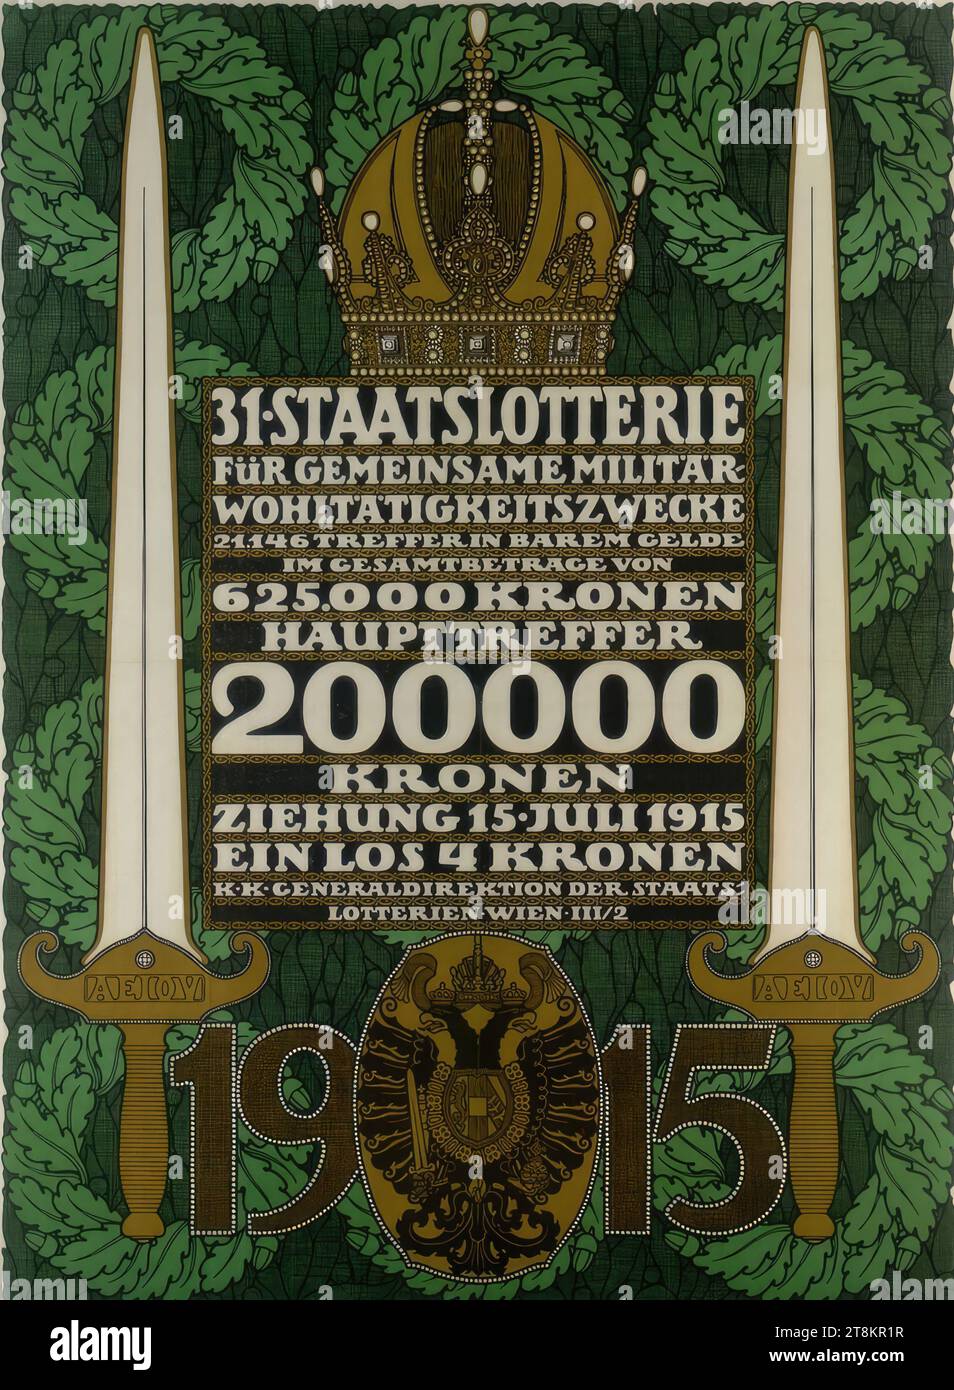 31. STATE LOTTERY; FOR JOINT MILITARY CHARITY PURPOSES; DRAW JULY 15, 1915, Rudolf Junk, Vienna 1880 - 1943 Rekawinkel, 1915, print, color lithograph, sheet: 1260 mm x 950 mm, Austria Stock Photo